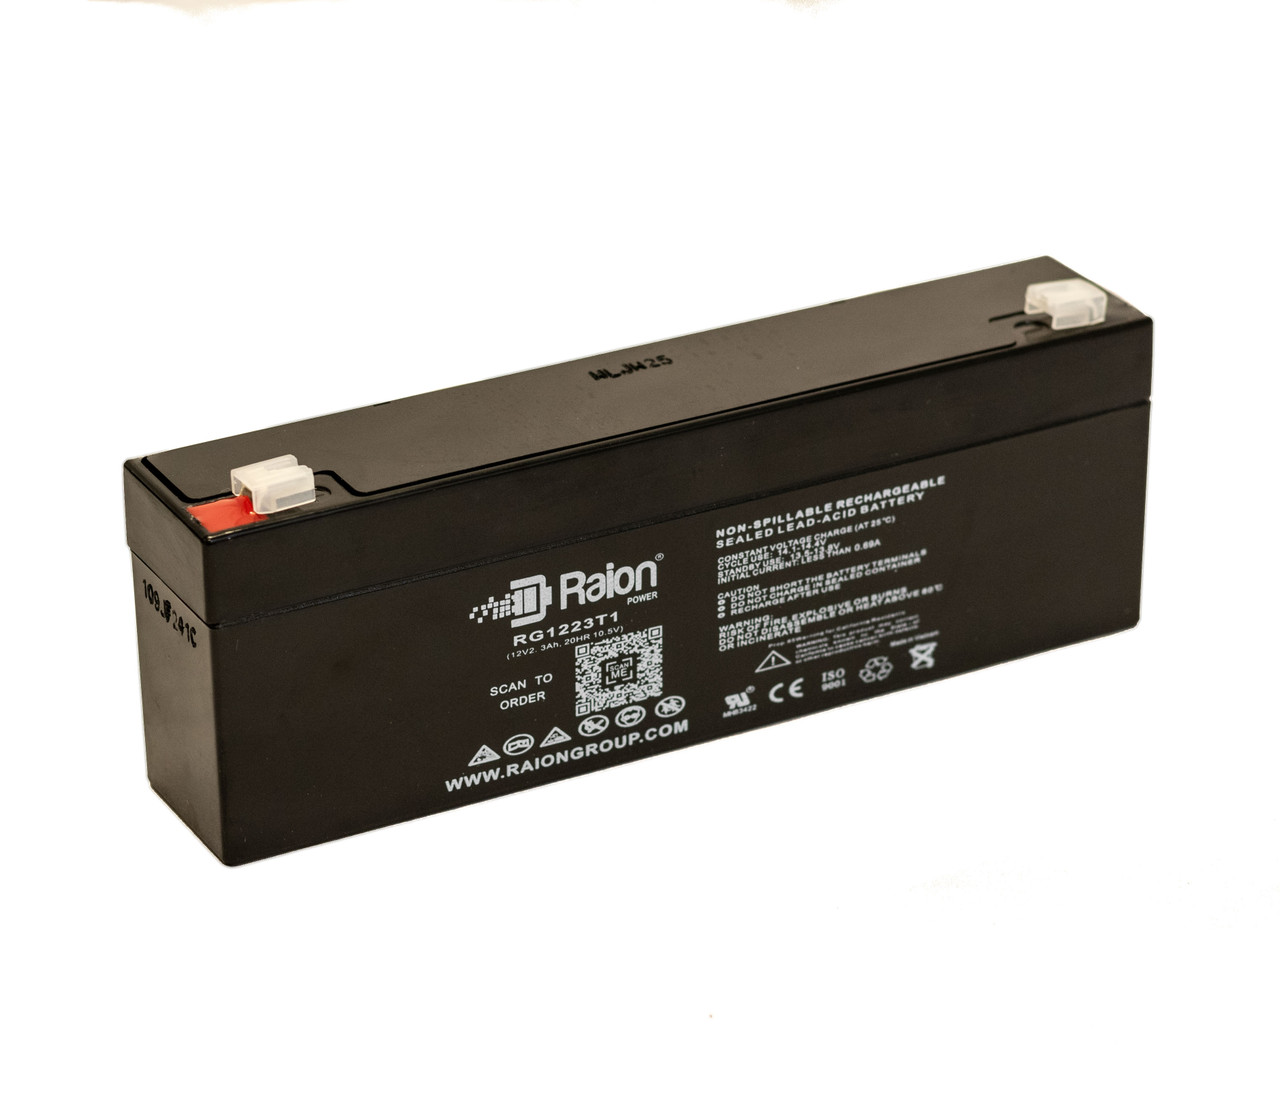 Raion Power RG1223T1 Replacement Battery for Zimmer ATS 1500 Tourniquet